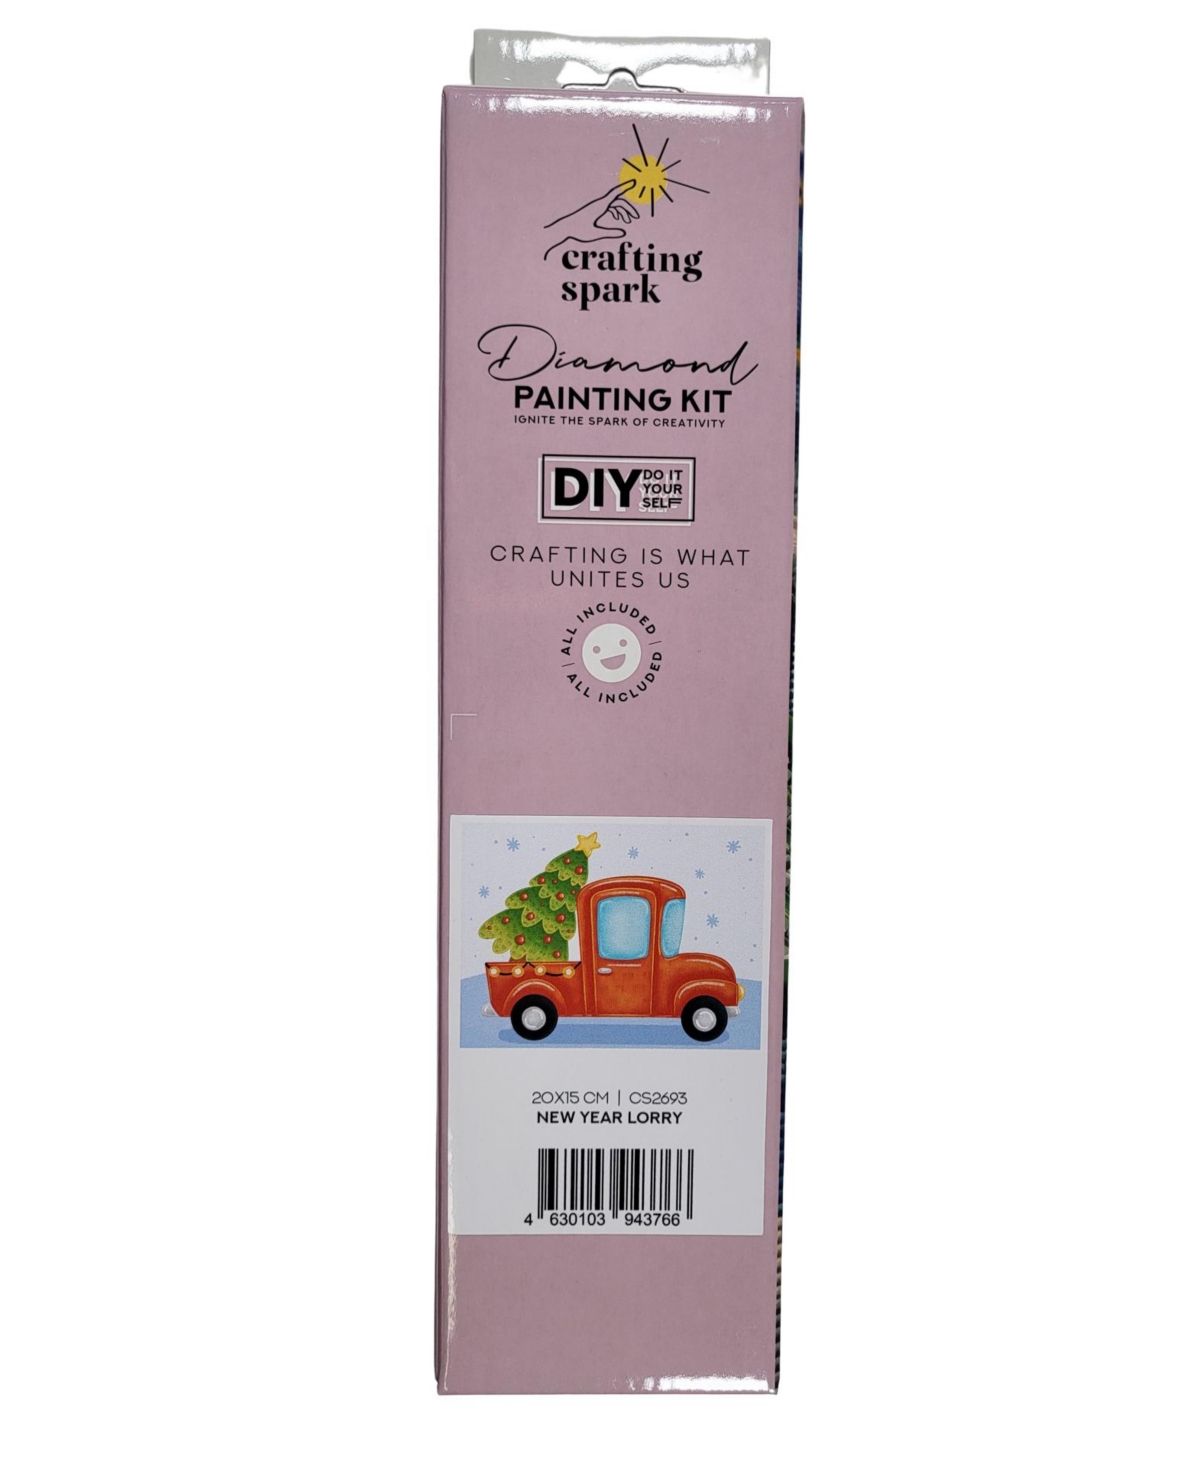 Crafting Spark Diamond Painting Kit New Year Lorry CS2693 7.9 x 5.9 inches